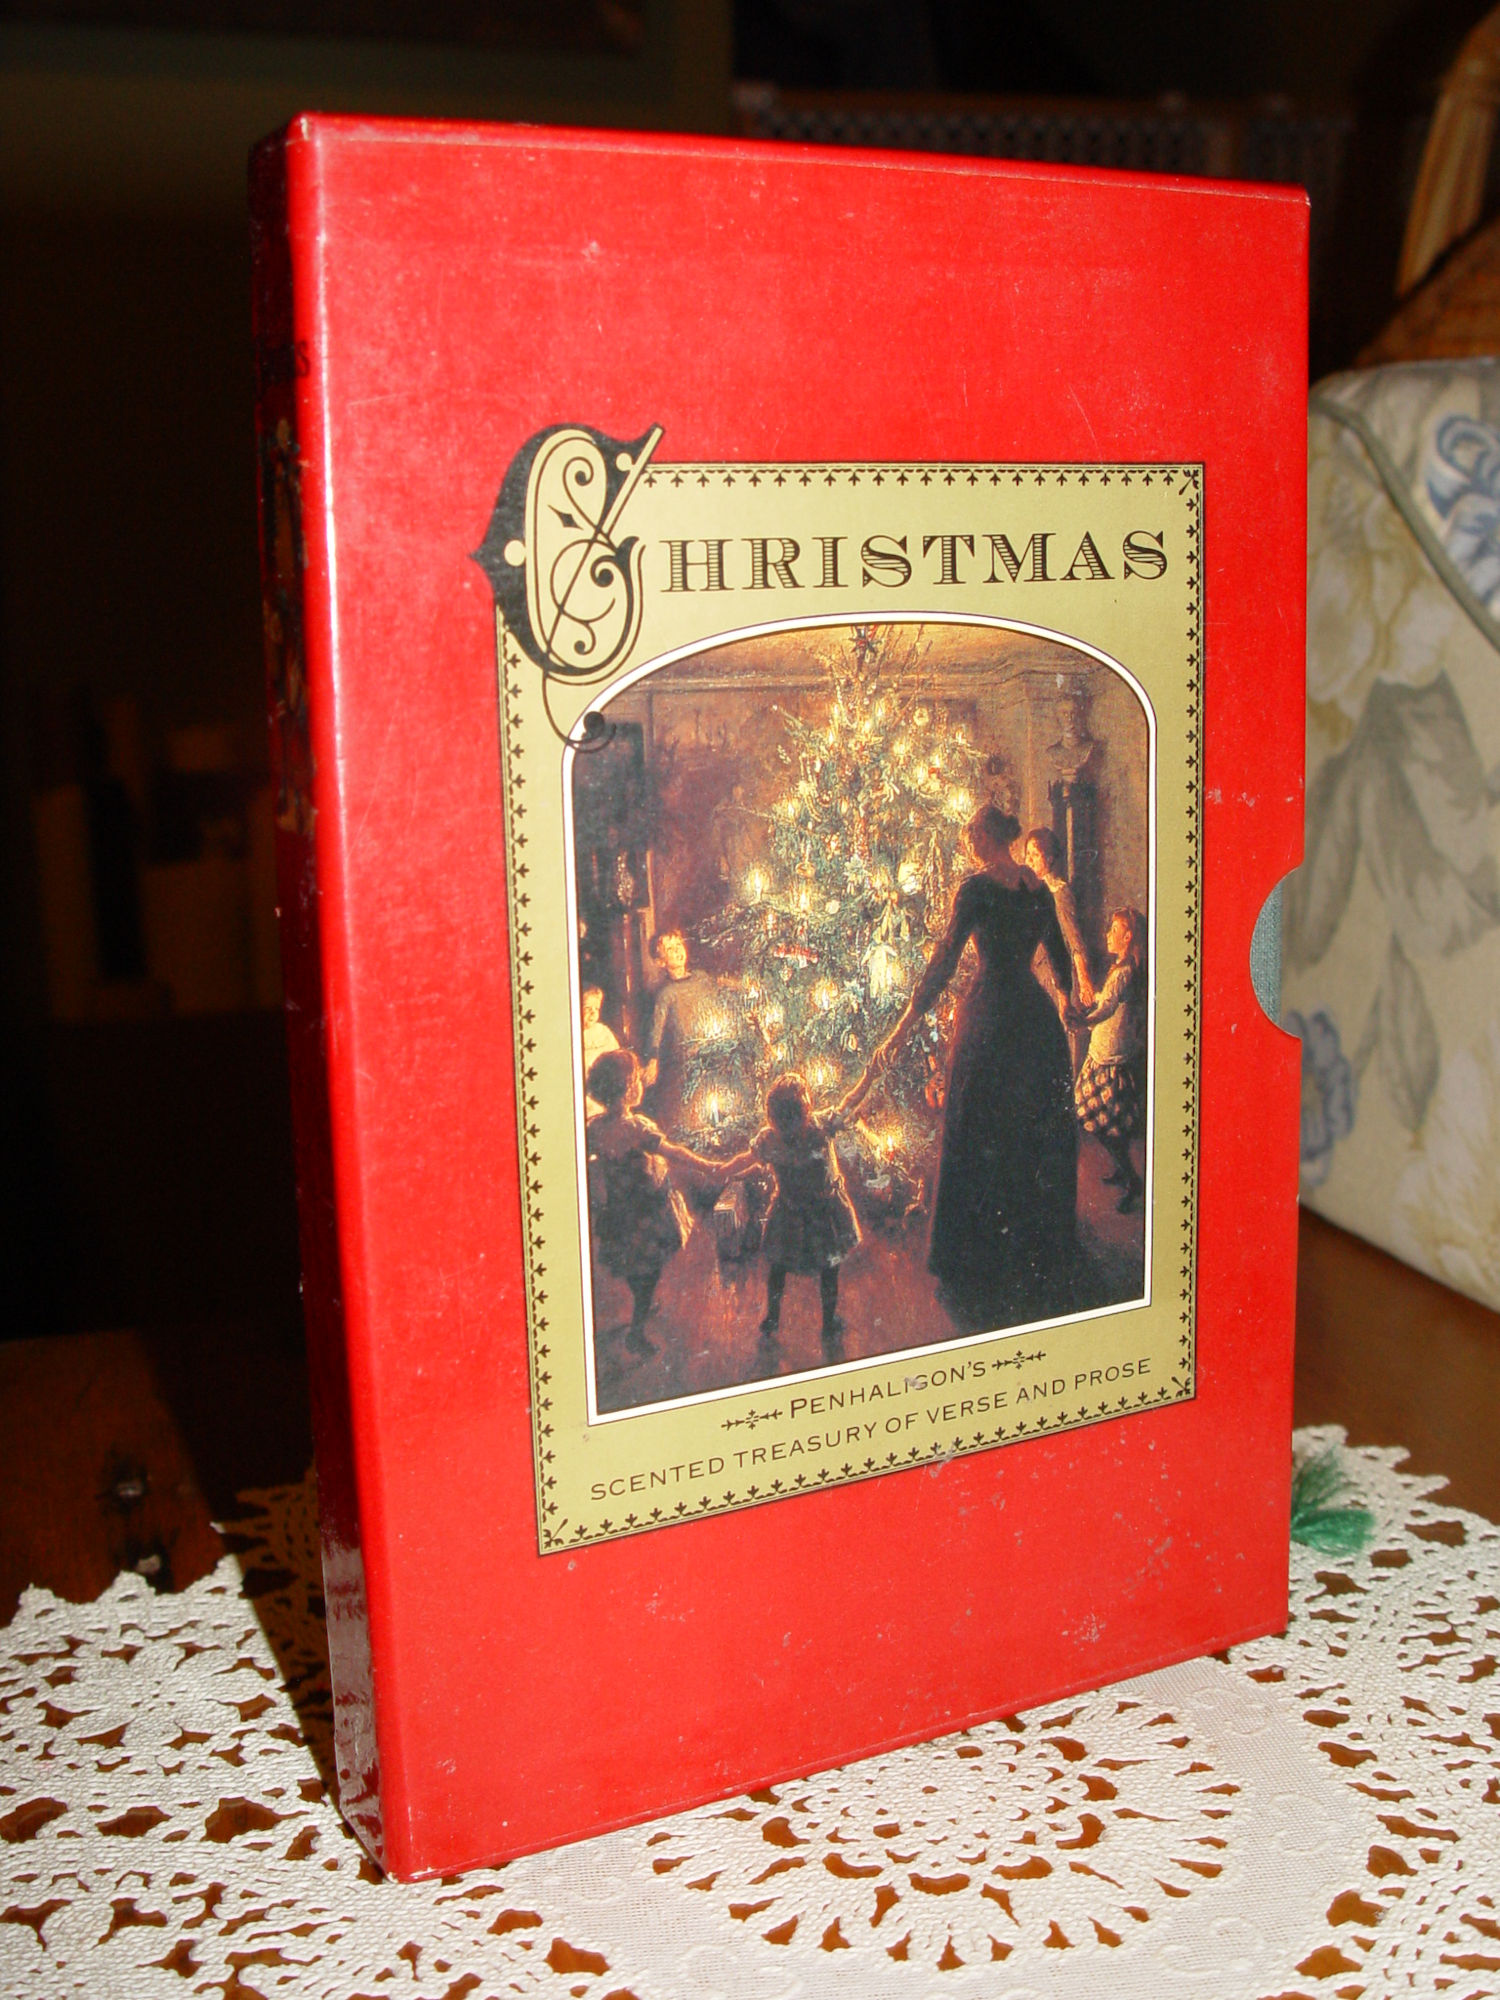 Christmas: Penhaligon's Scented Treasury of
                        Verse and Prose 1989 1st Ed. by Sheila Pickles